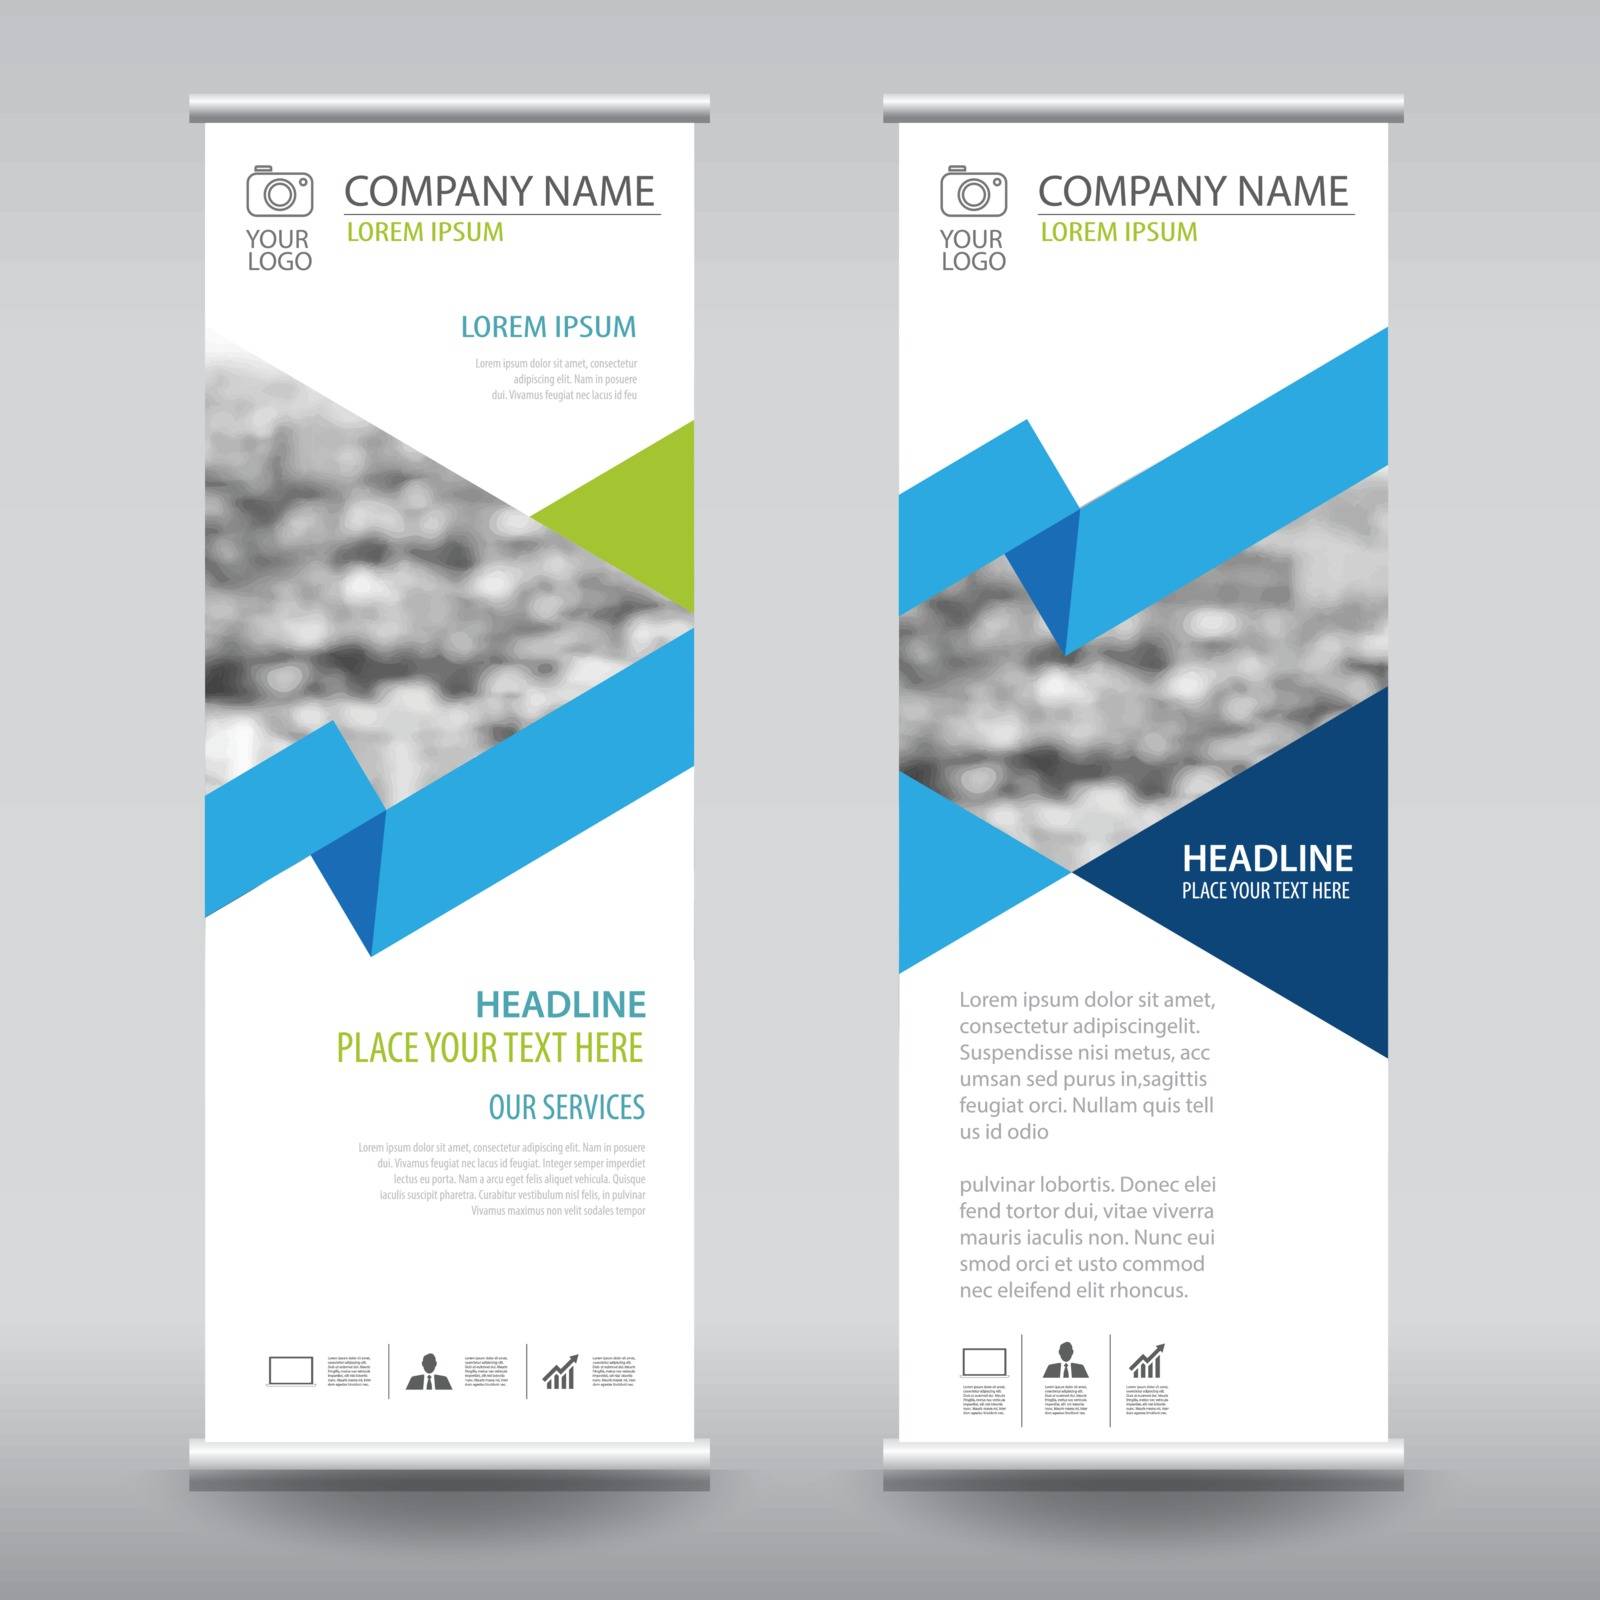 roll up business brochure flyer banner design vertical template vector, cover presentation abstract geometric background, modern publication x-banner and flag-banner